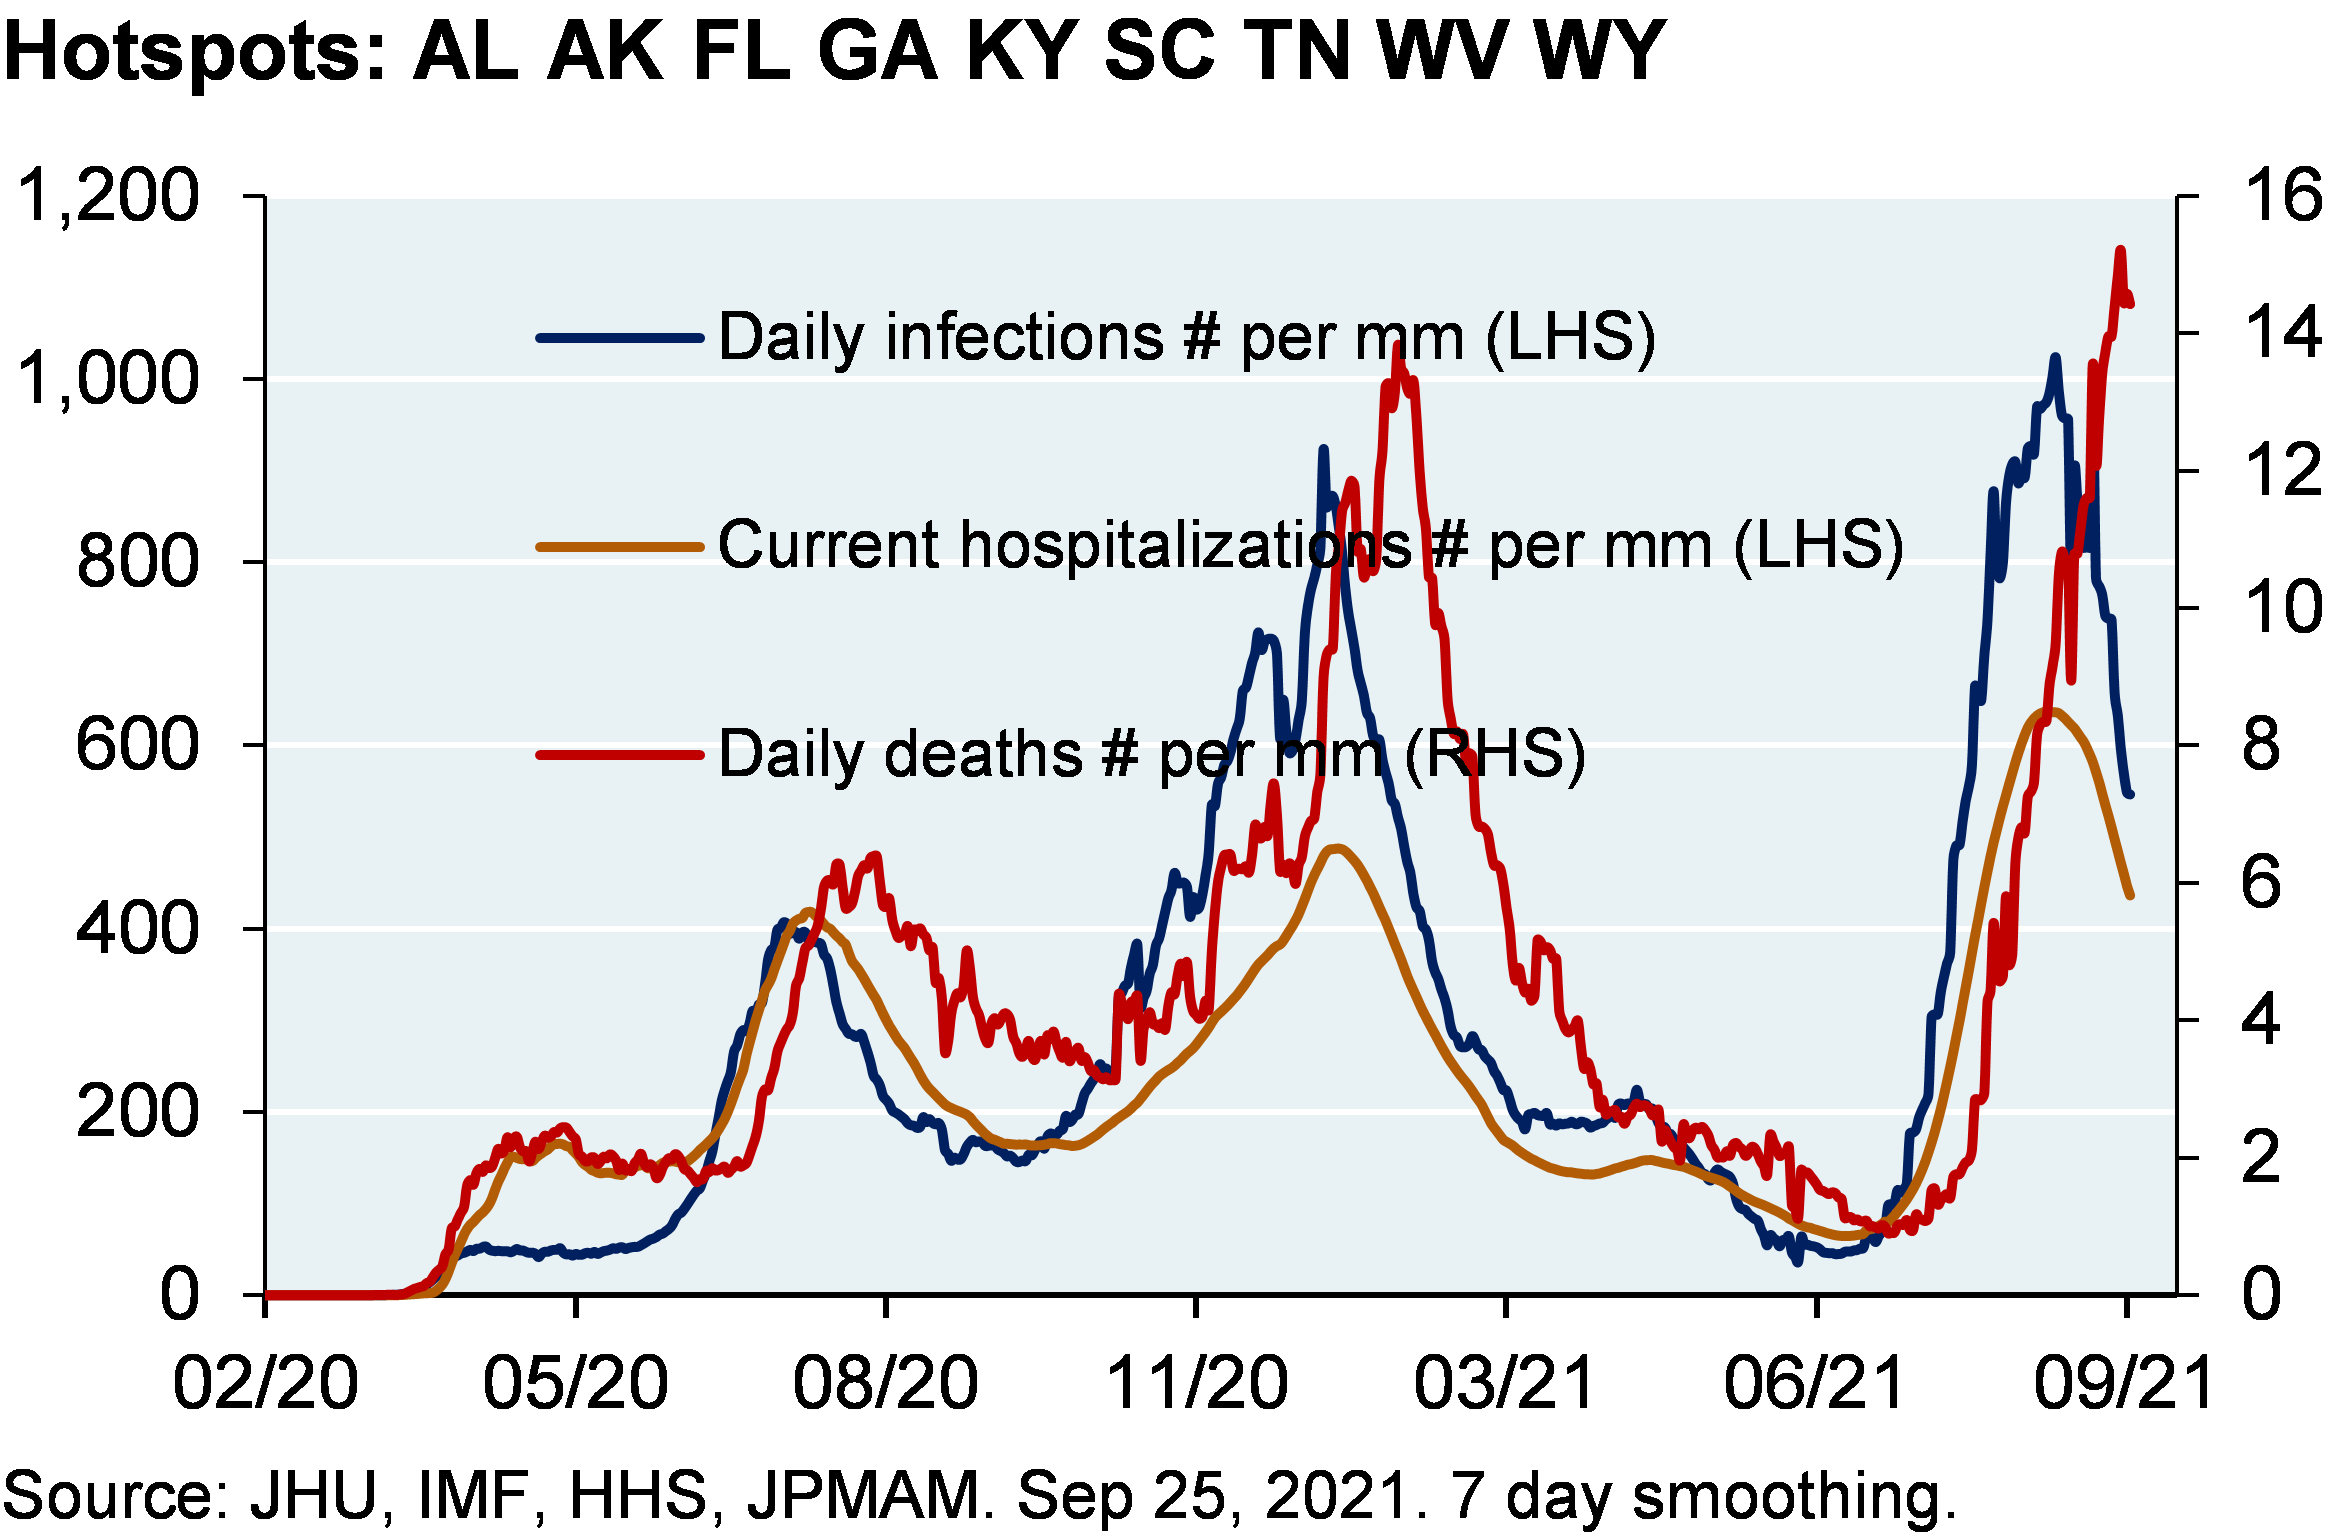 Line chart shows daily infections per million, current hospitalizations and daily deaths per million for US COVID hotspot states.  Daily infections and hospitalizations have begun to roll over from the latest surge, while mortality is still rising.